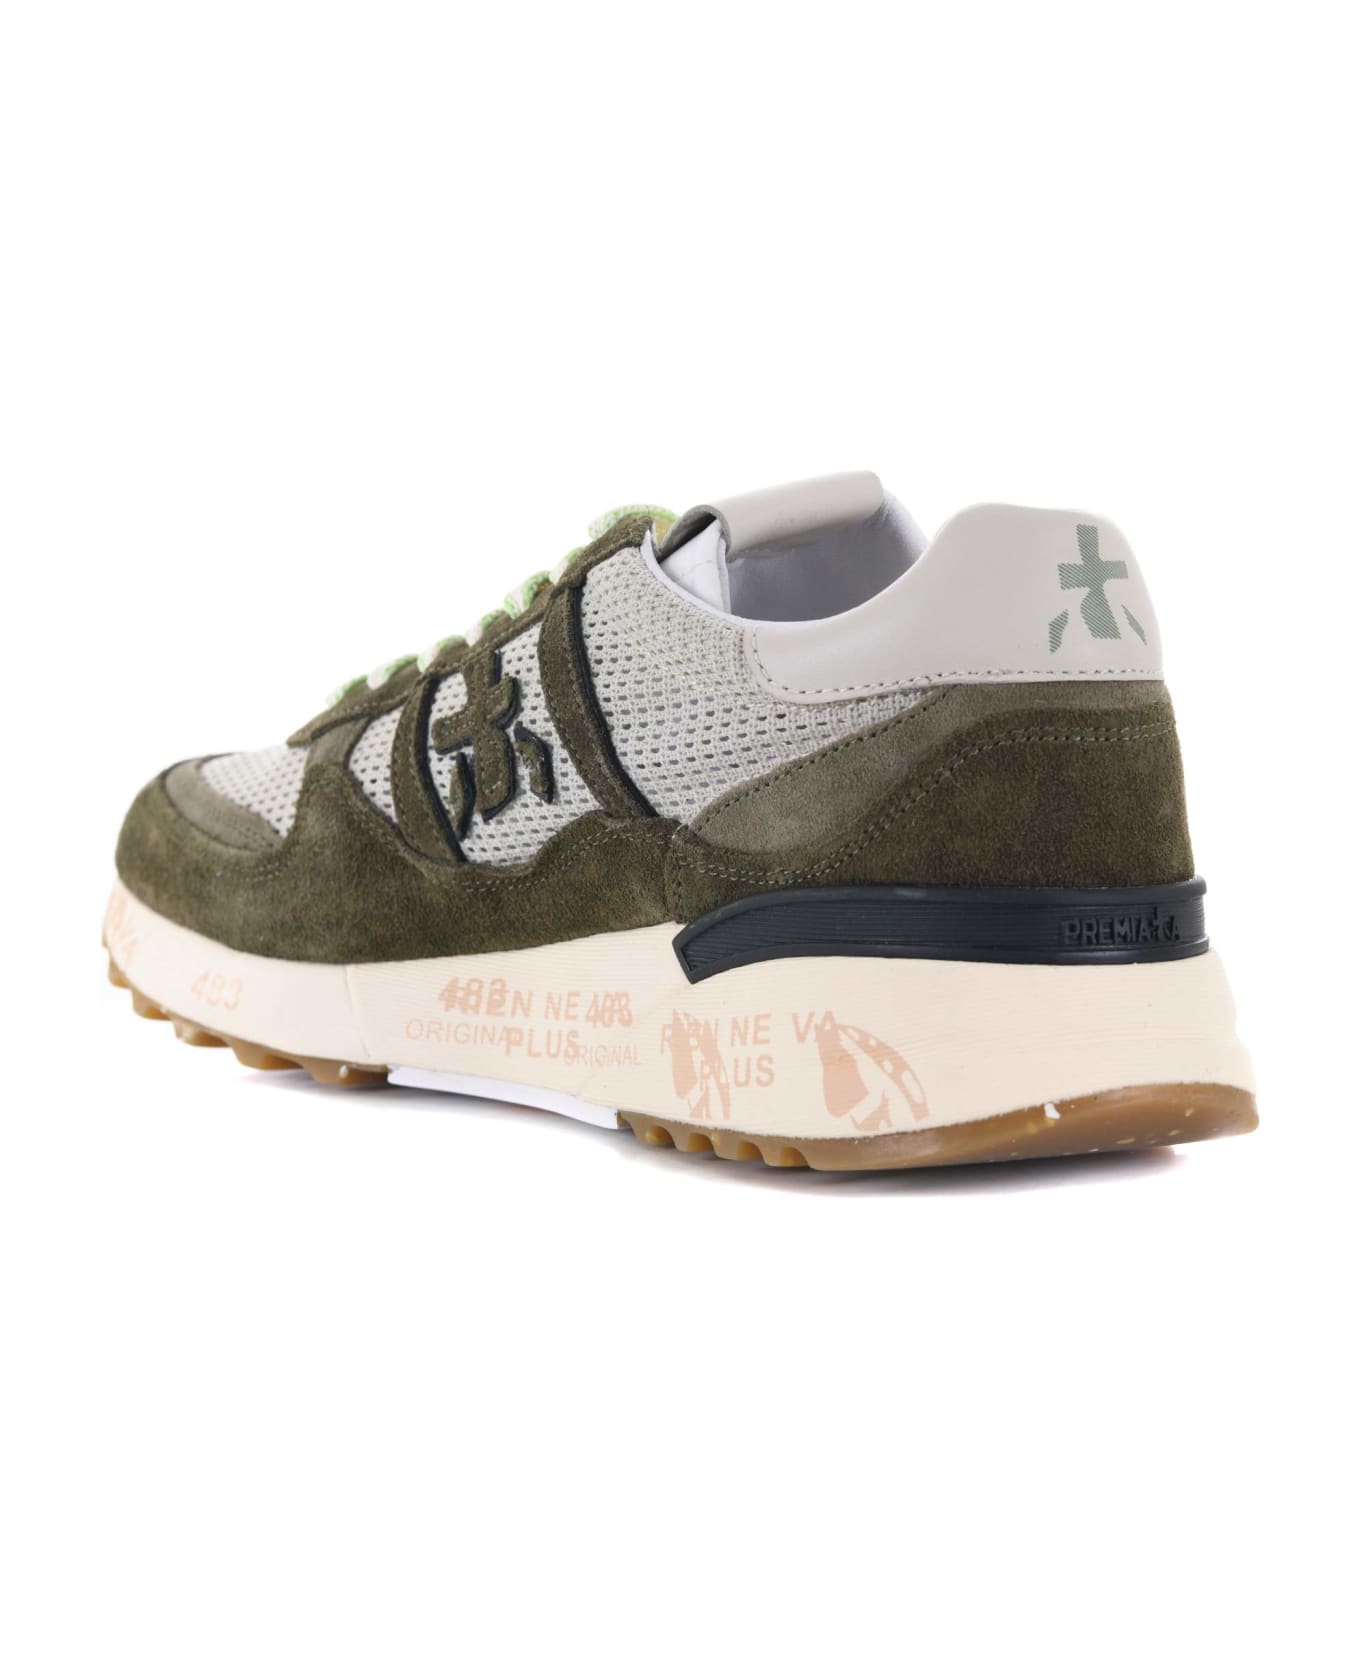 Premiata Sneakers In Suede And Perforated Mesh - Verde militare スニーカー